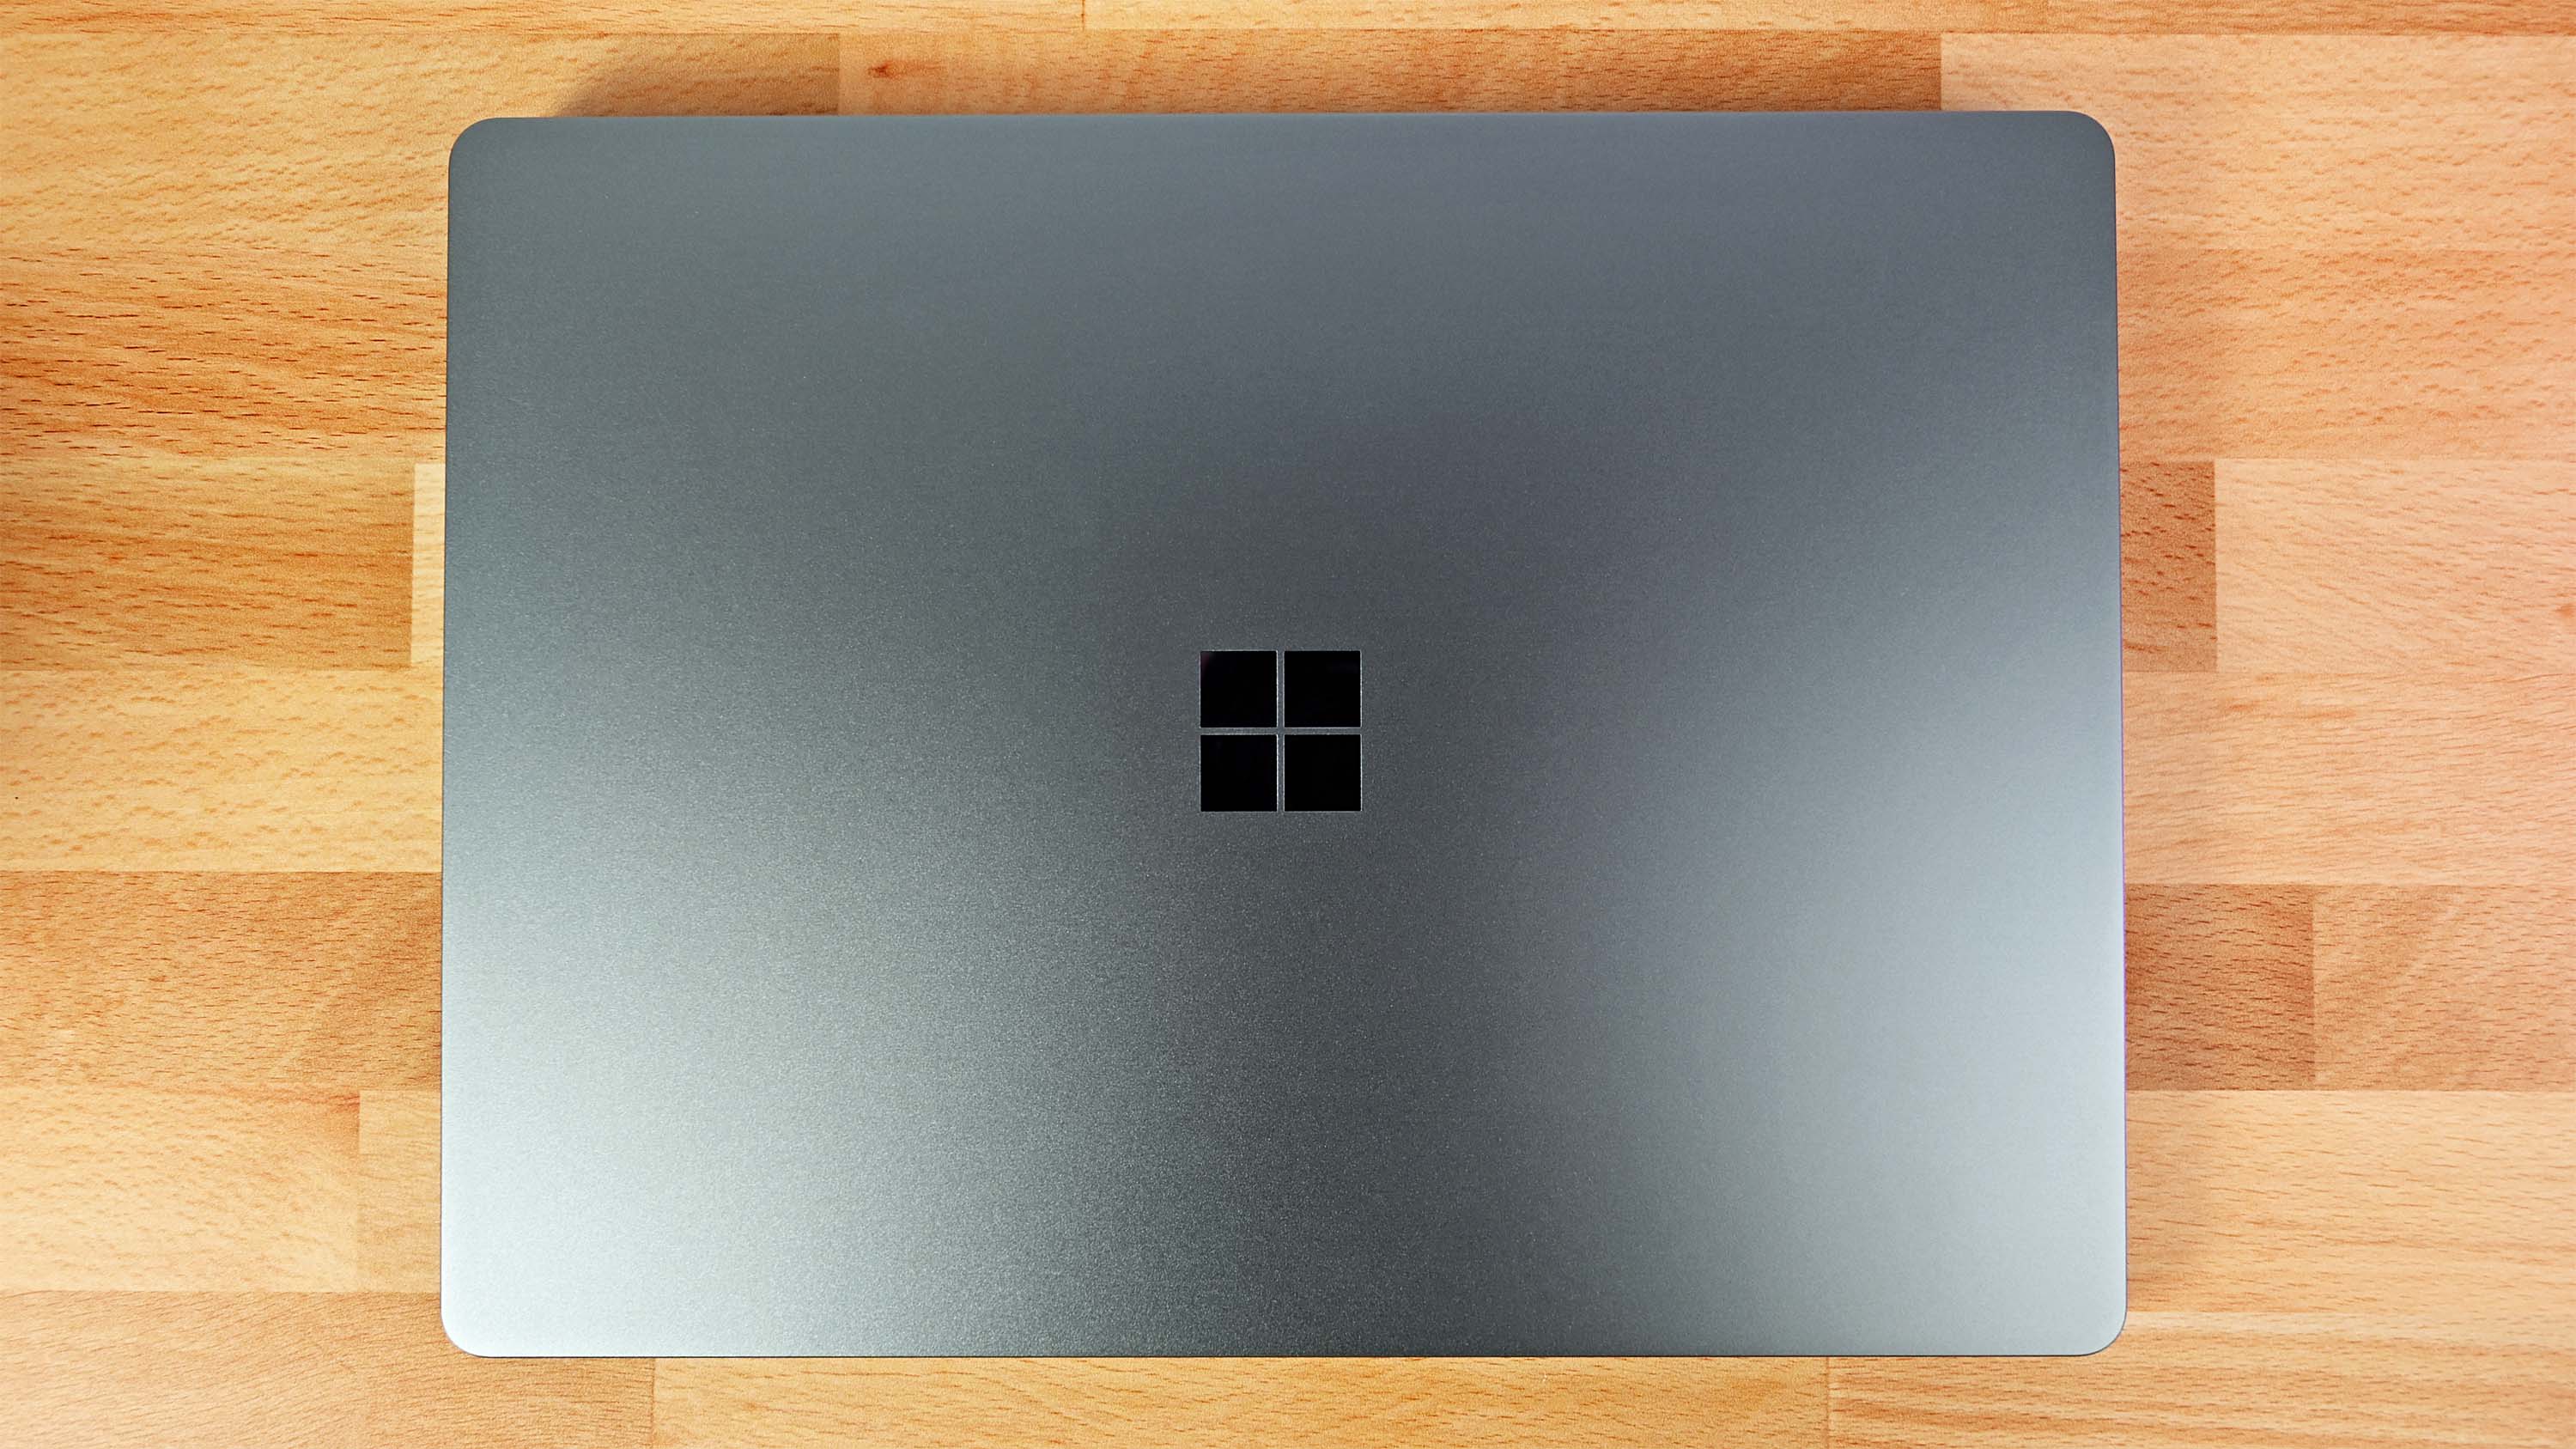 EXCLUSIVE: Microsoft will unveil OLED Surface Pro 10 and Arm 